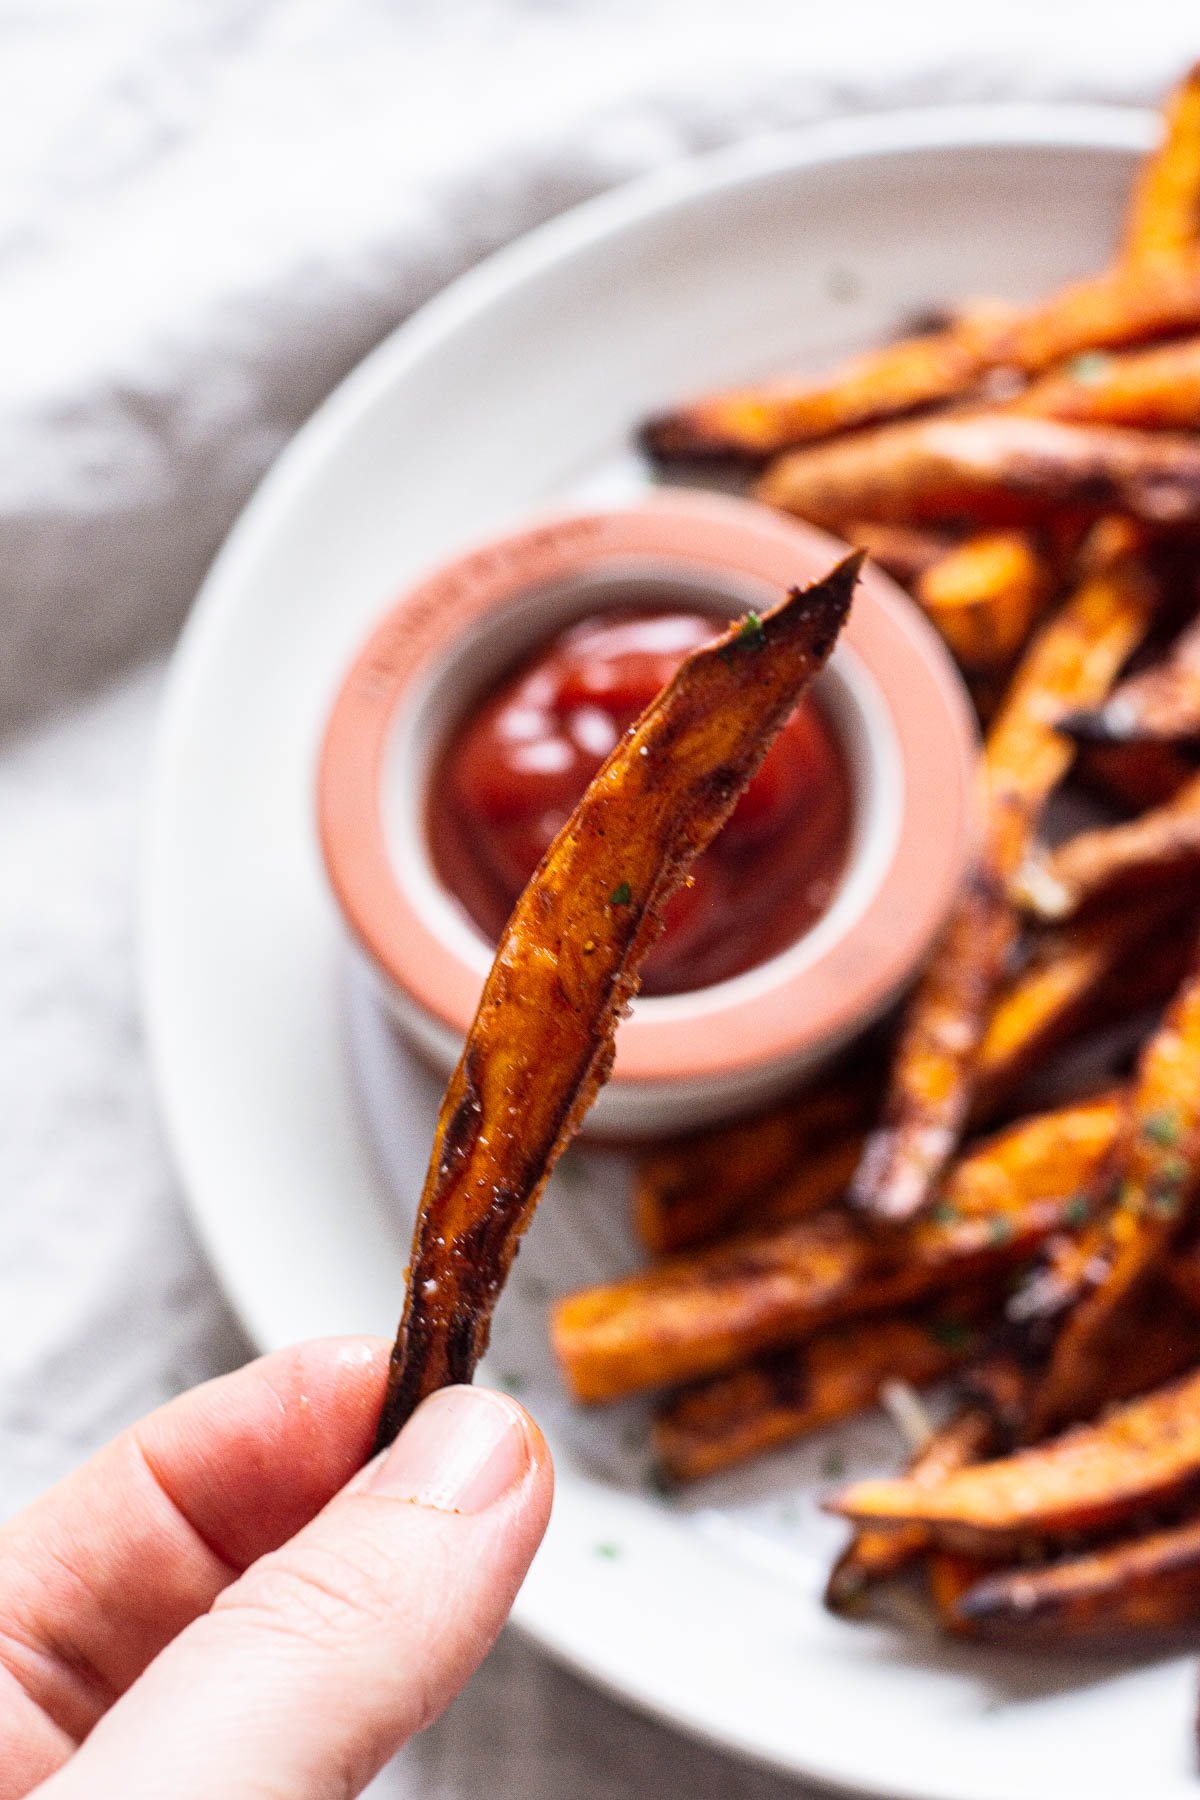 Holding one air fryer sweet potato fry with plated fries in background with ketchup.